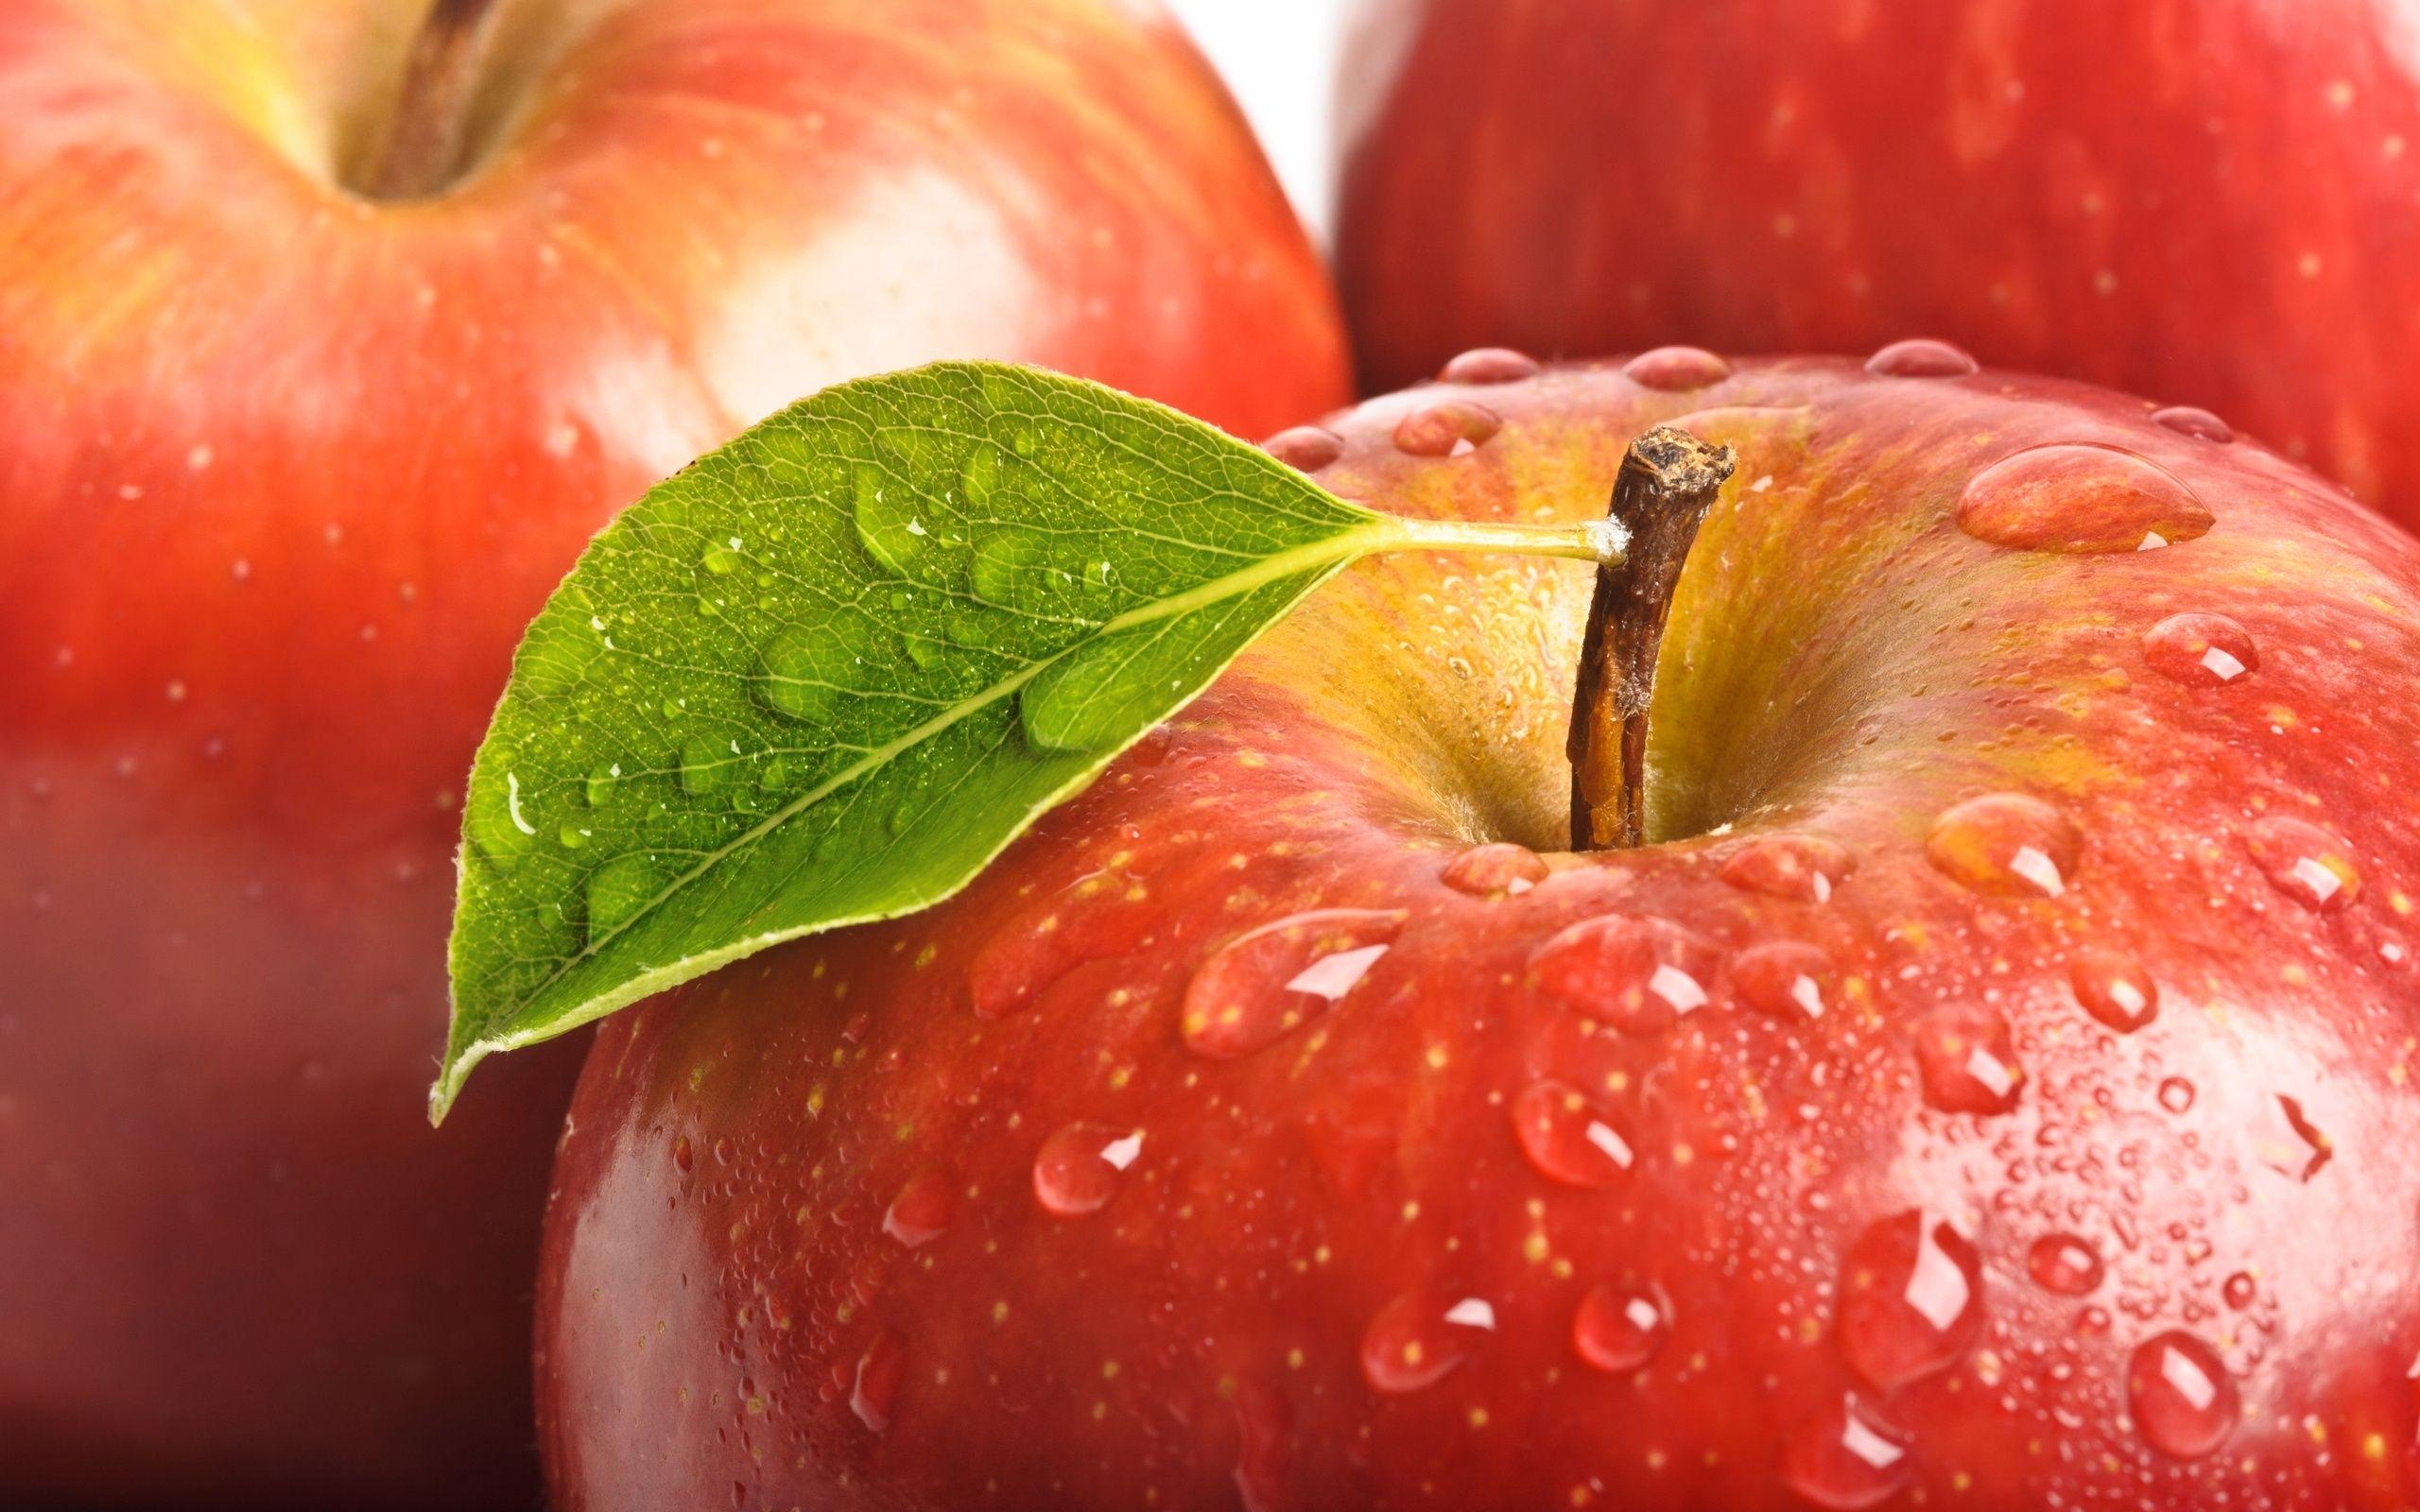 Red Apple 34696 2560x1600 px